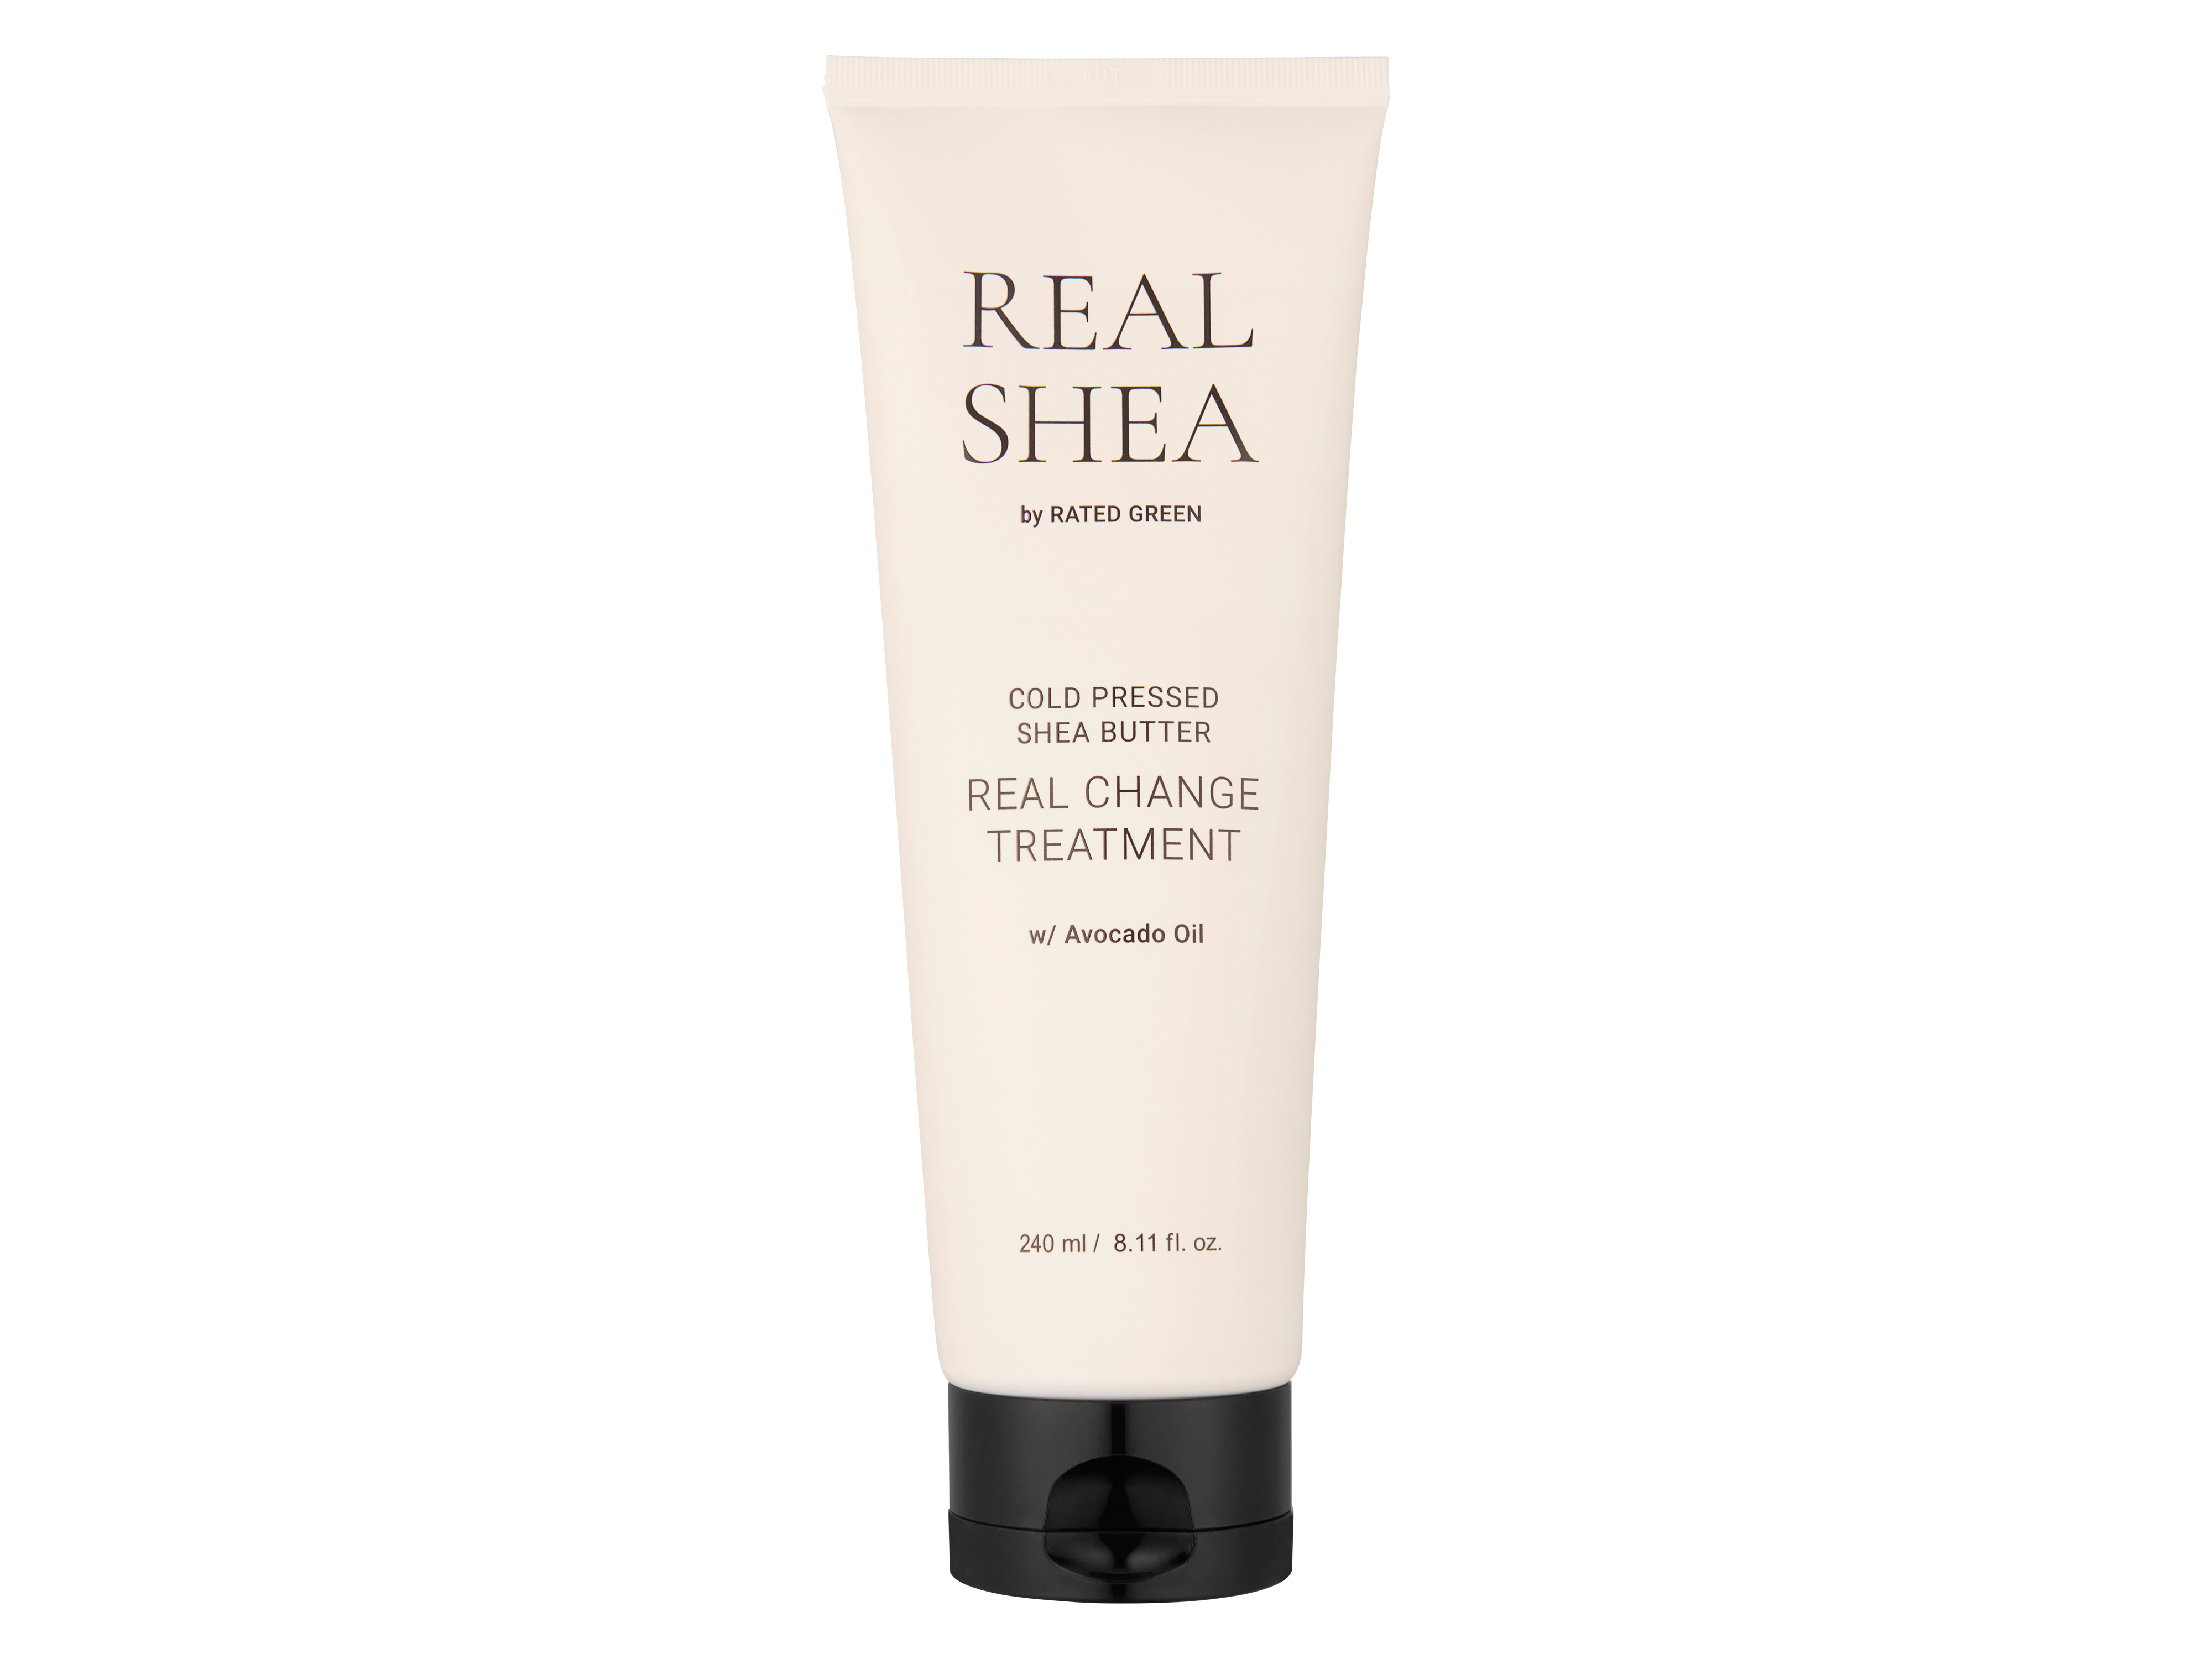 Rated Green Cold Pressed Shea Butter Real Change Treatment, 240 ml